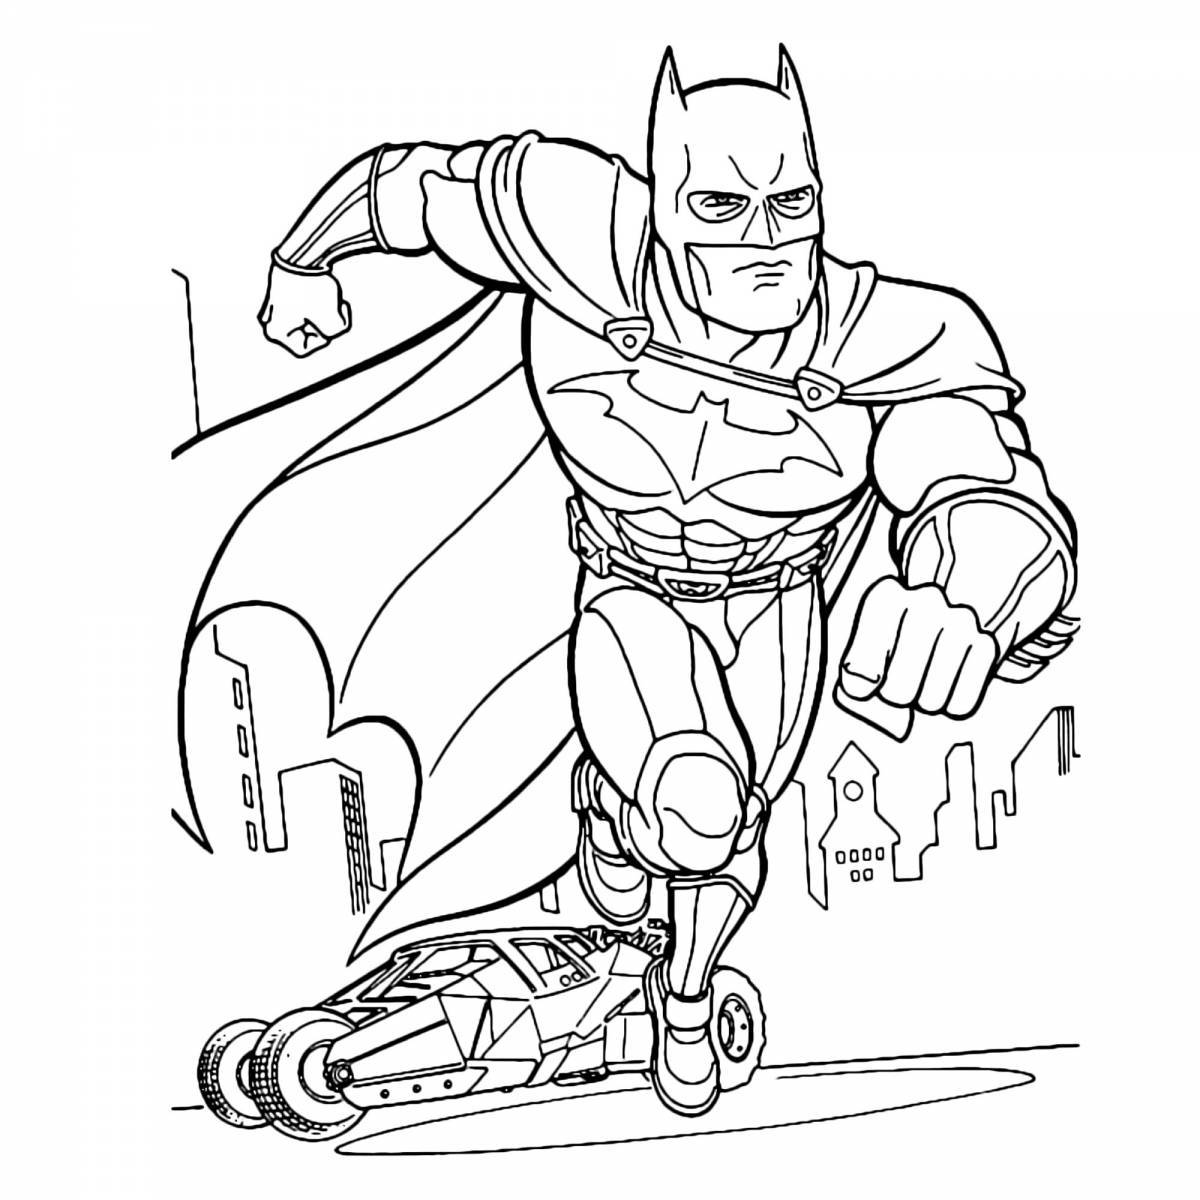 Great superhero coloring pages for kids